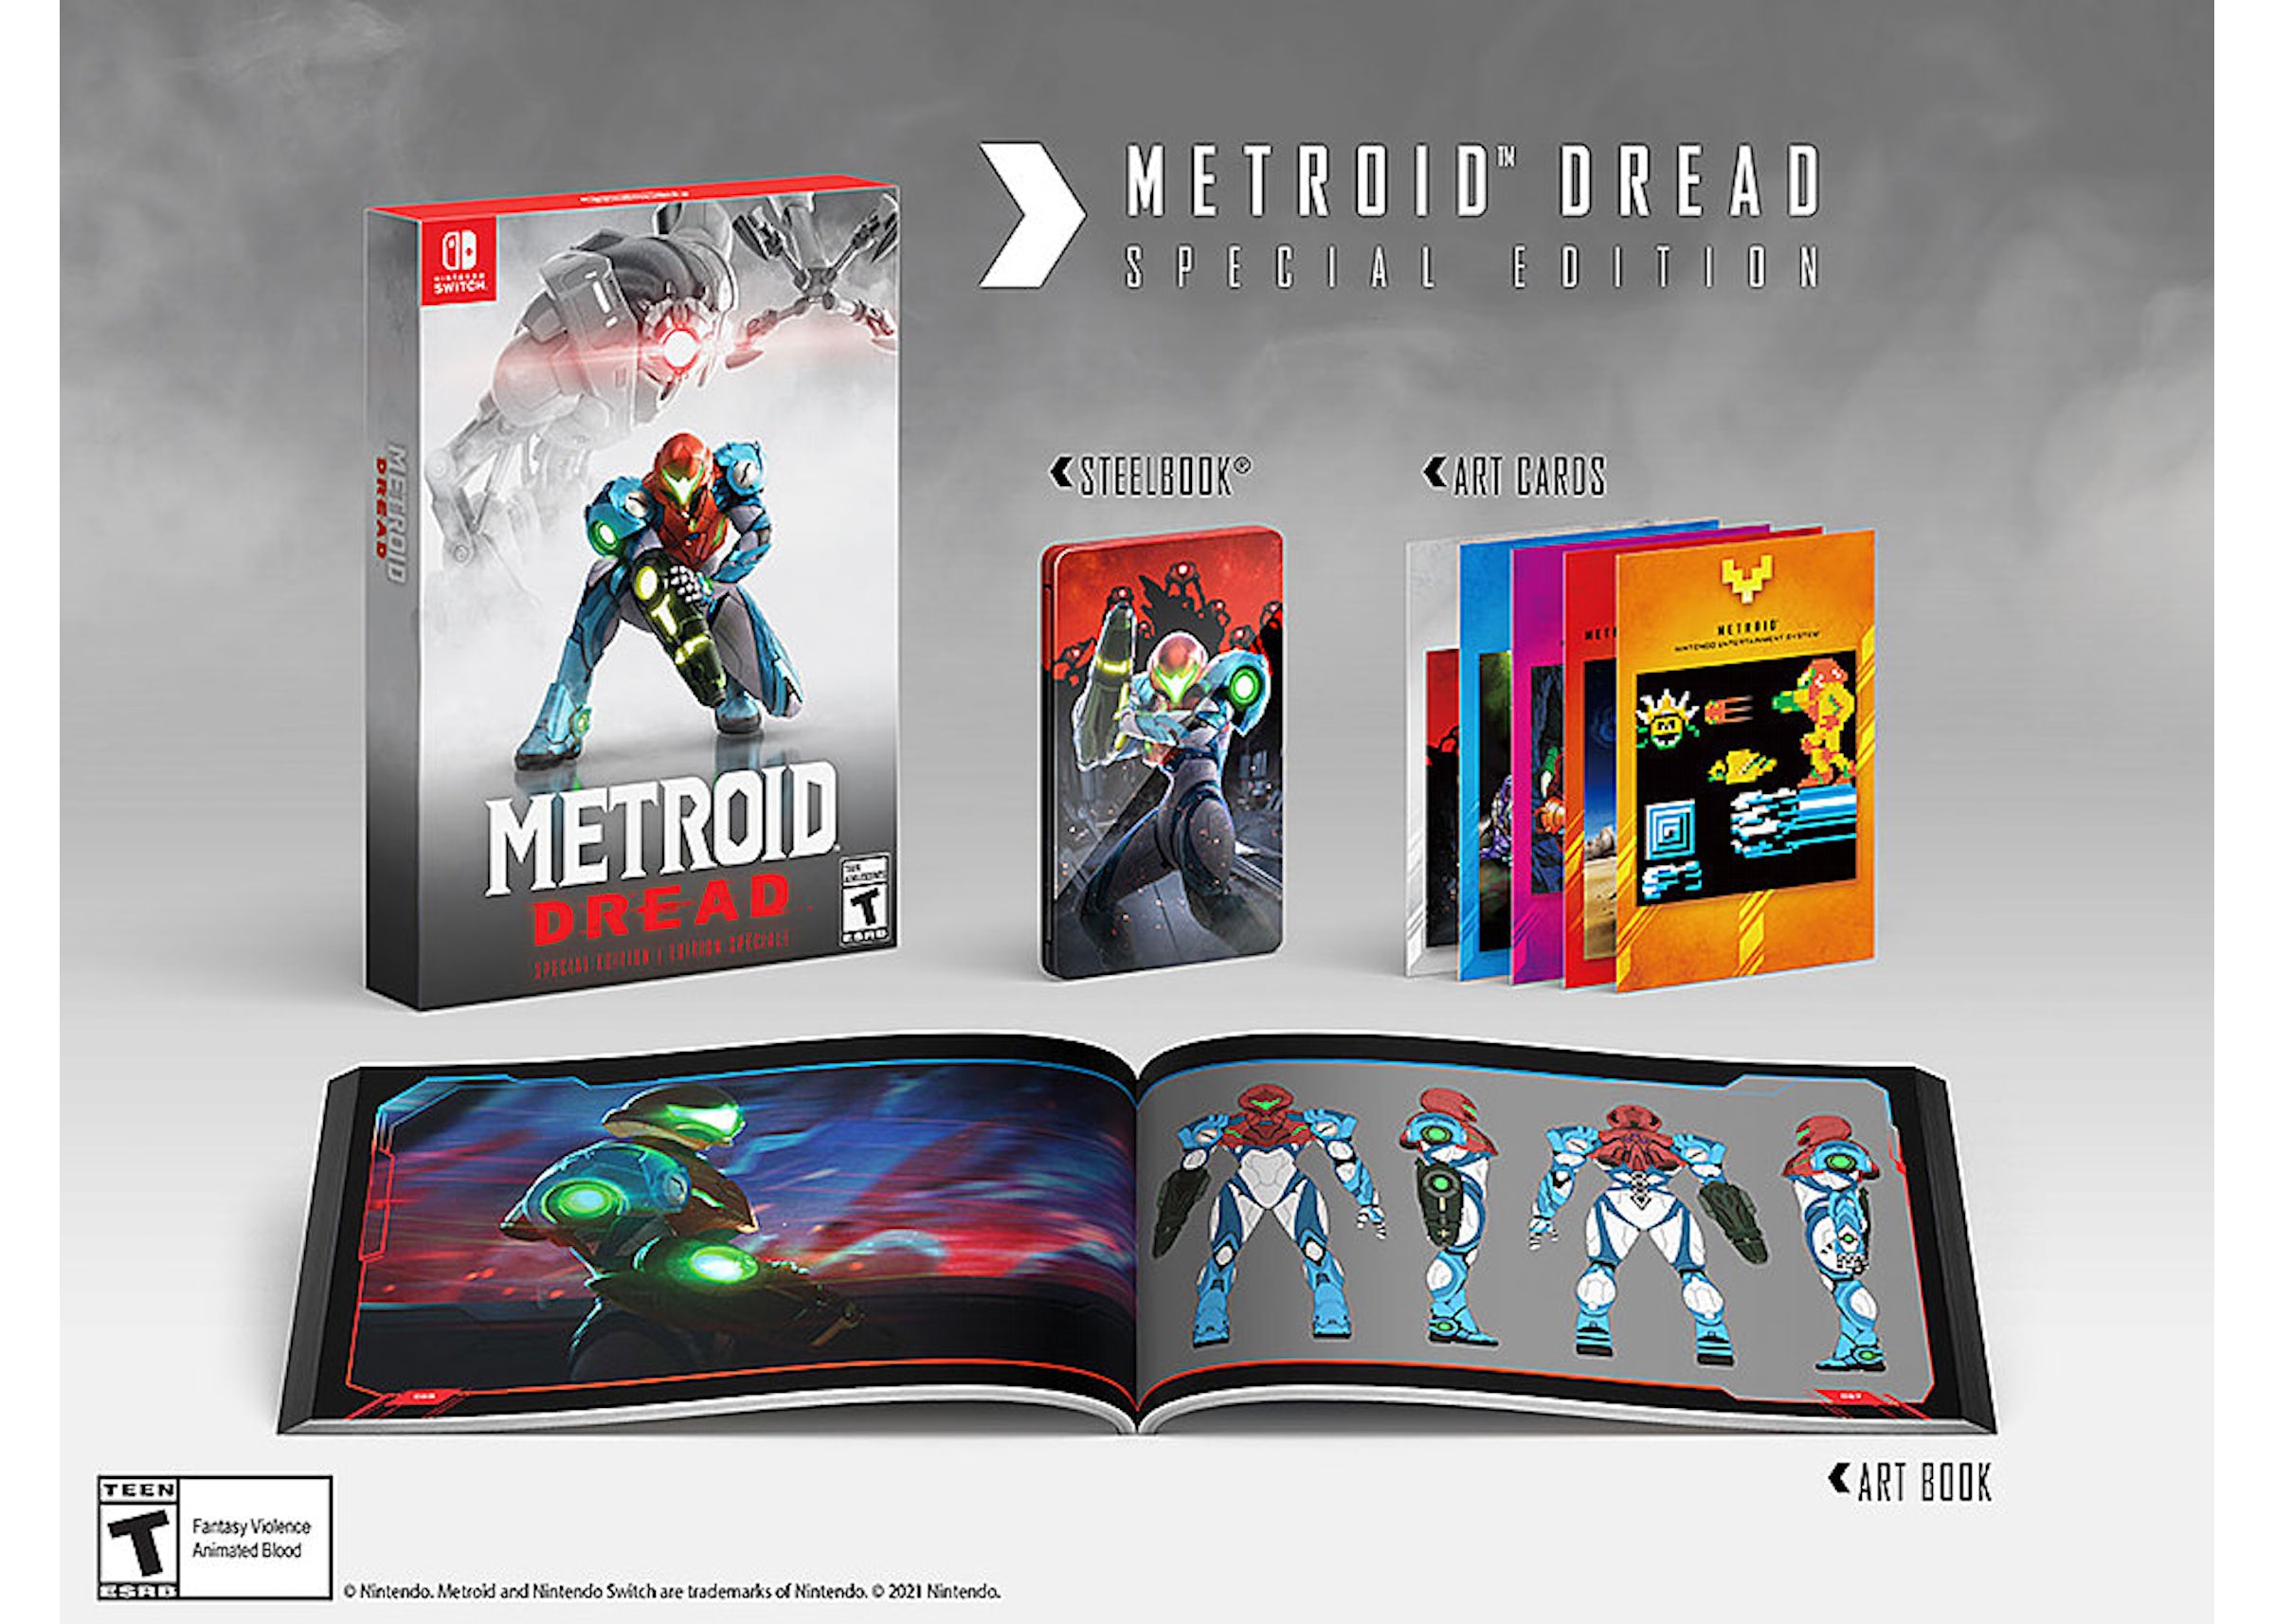 Nintendo Switch Metroid Dread Special Edition Video Game Bundle - IT